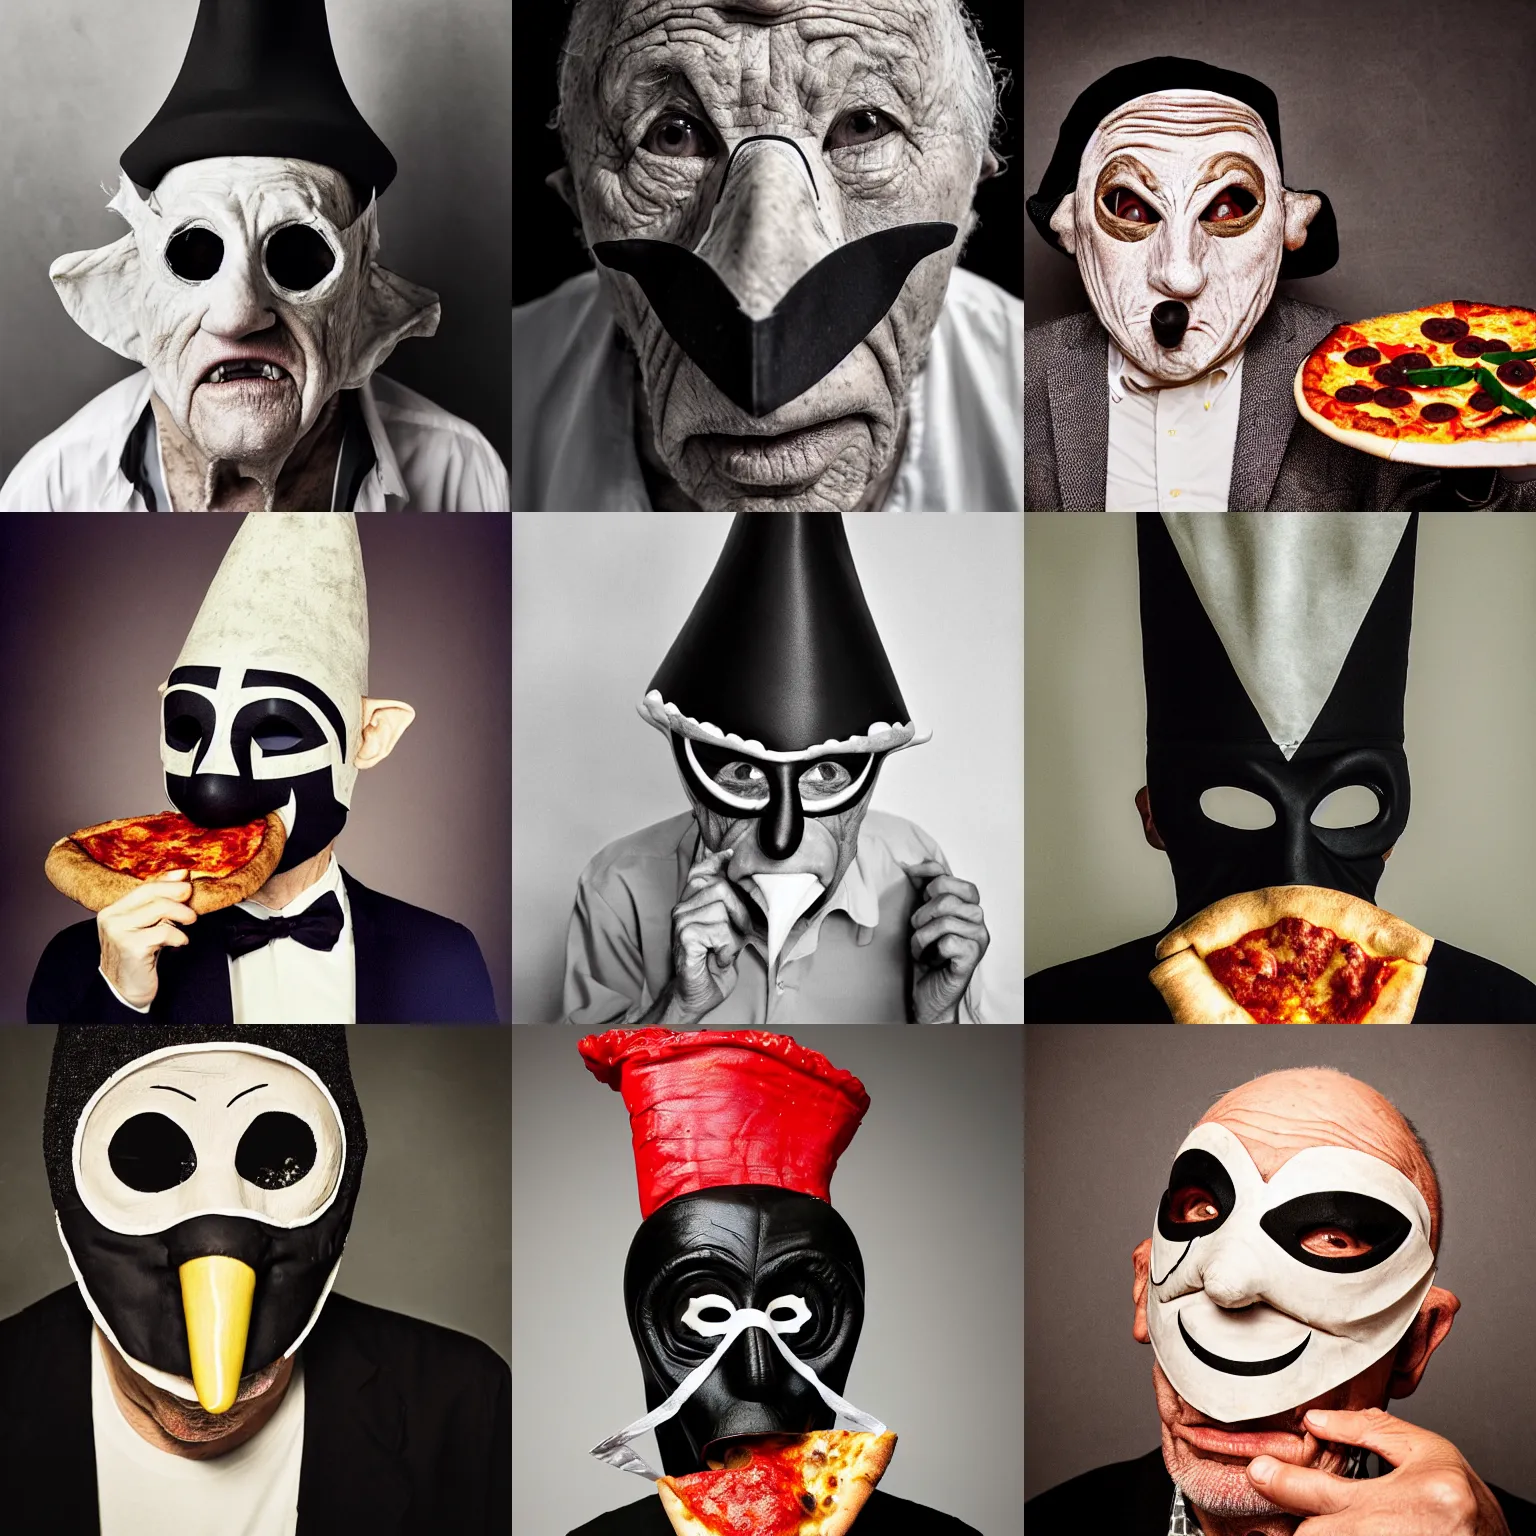 Prompt: portrait photo of an old wrinkled man, intimidating, long nose, crooked nose, large mouth, black pulcinella masquerade mask, pointy conical hat, white wrinkled shirt, presenting pizza, black background, close - up, skin blemishes, acclaimed masterpiece by diane arbus